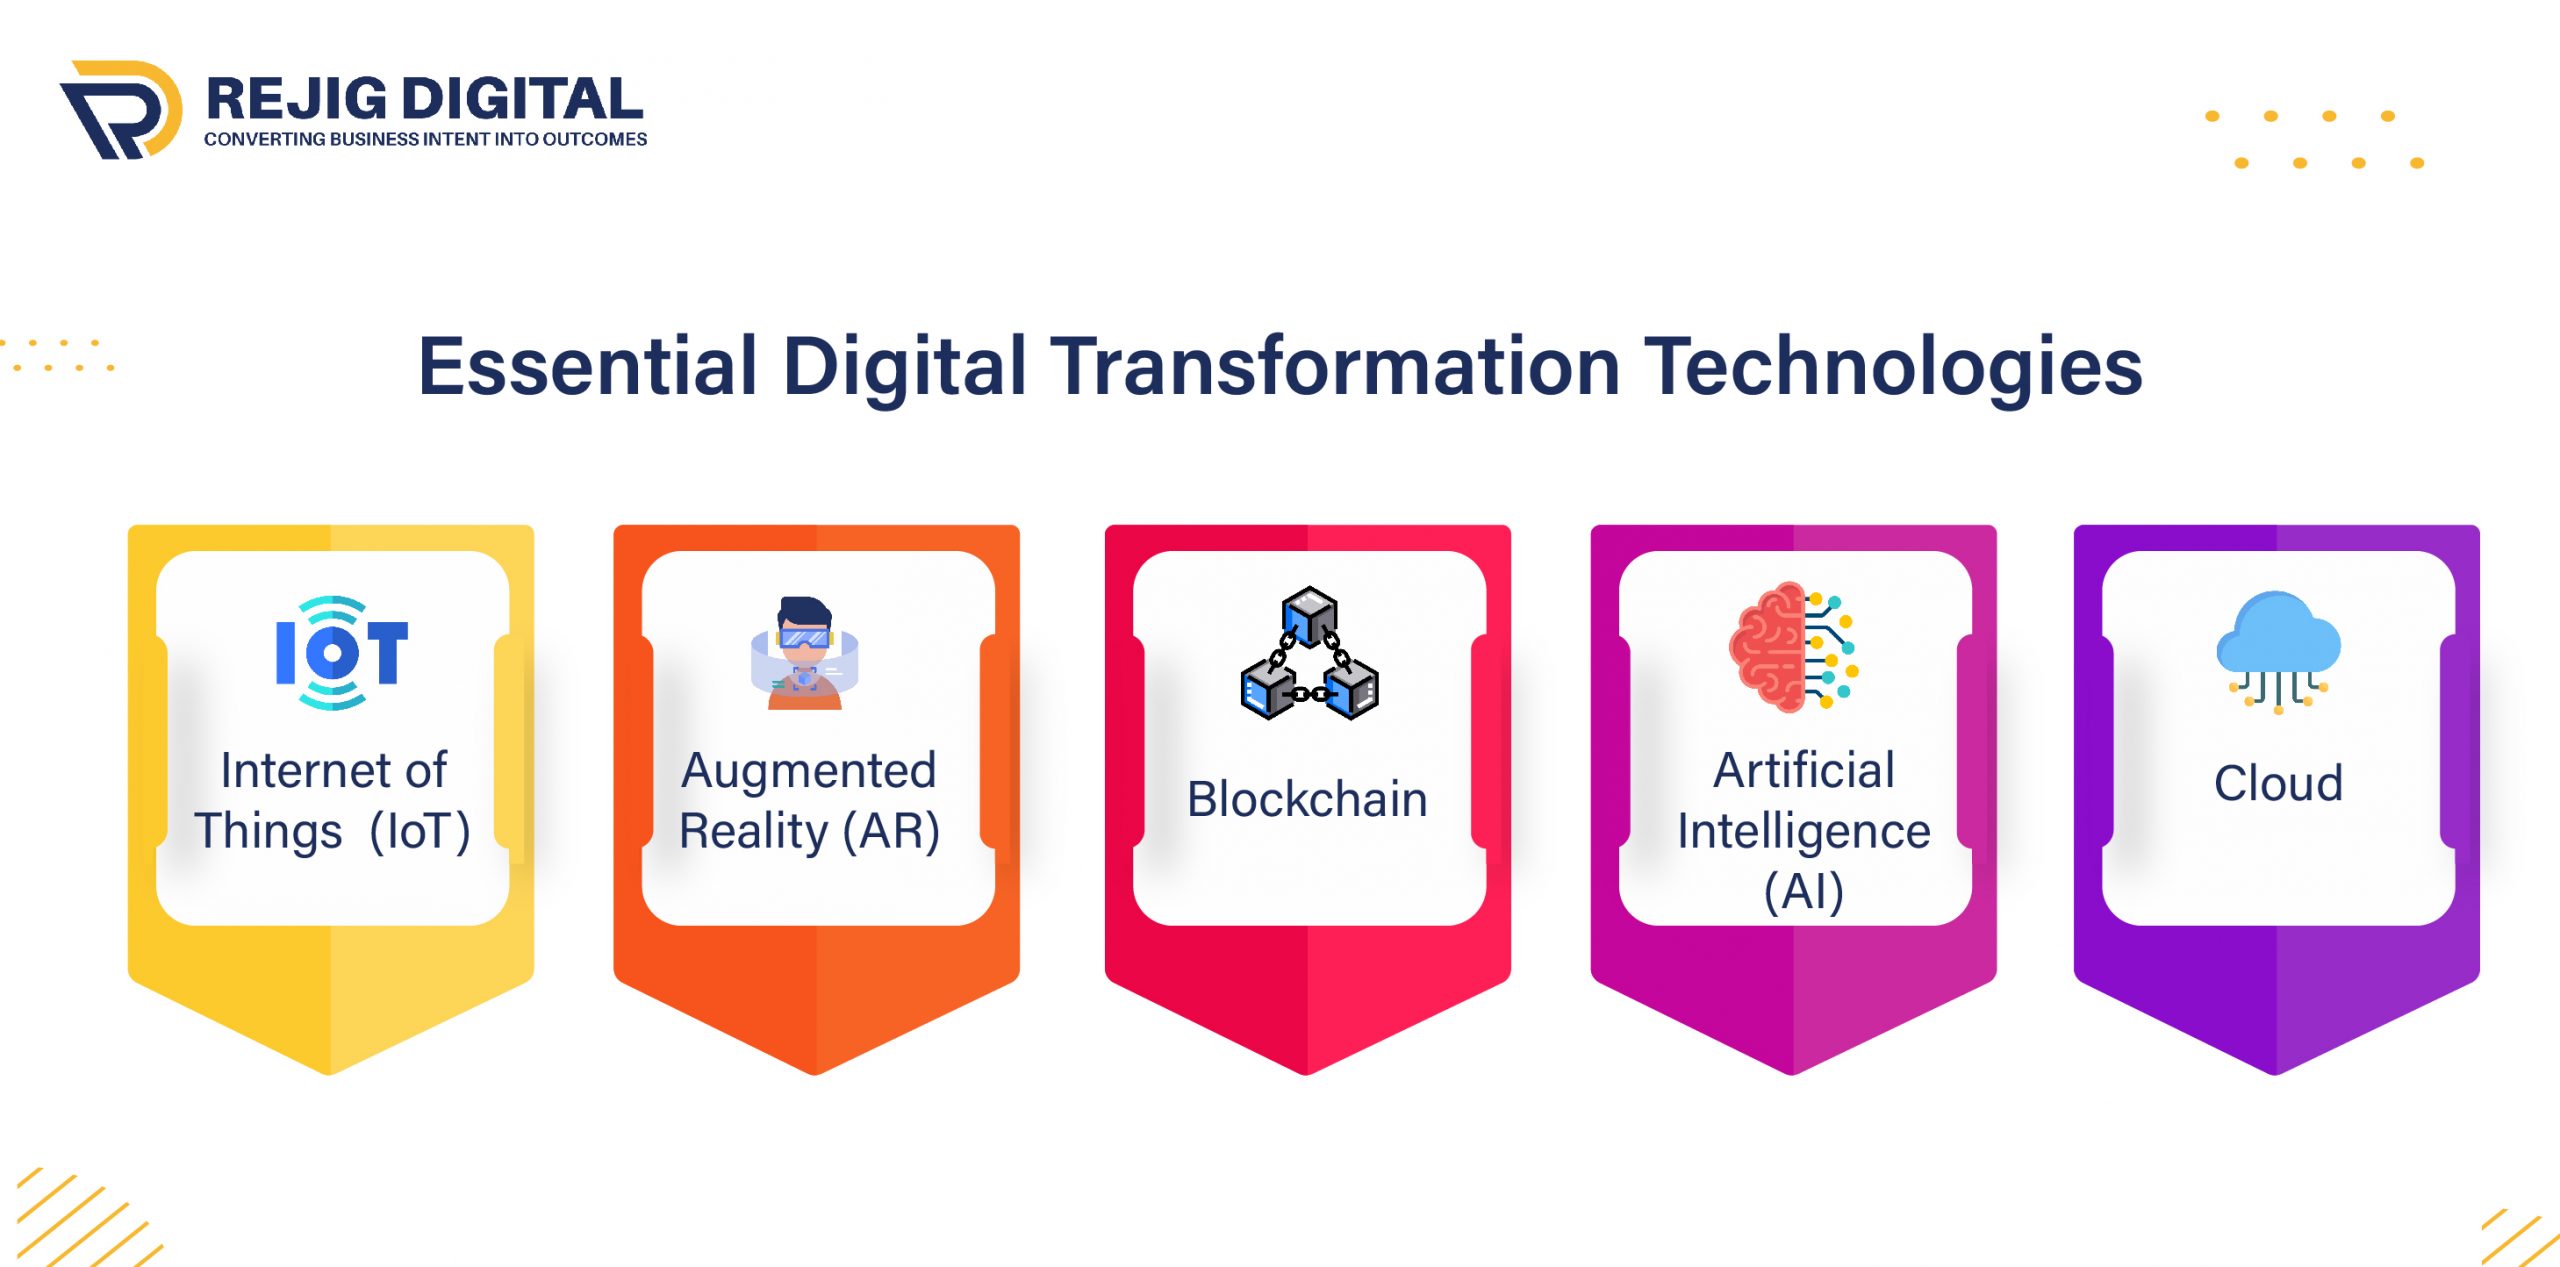 Essential Digital Transformation Technologies [IMAGE] Internet of Things (IoT) Augmented Reality (AR) Blockchain Artificial Intelligence (AI) Cloud